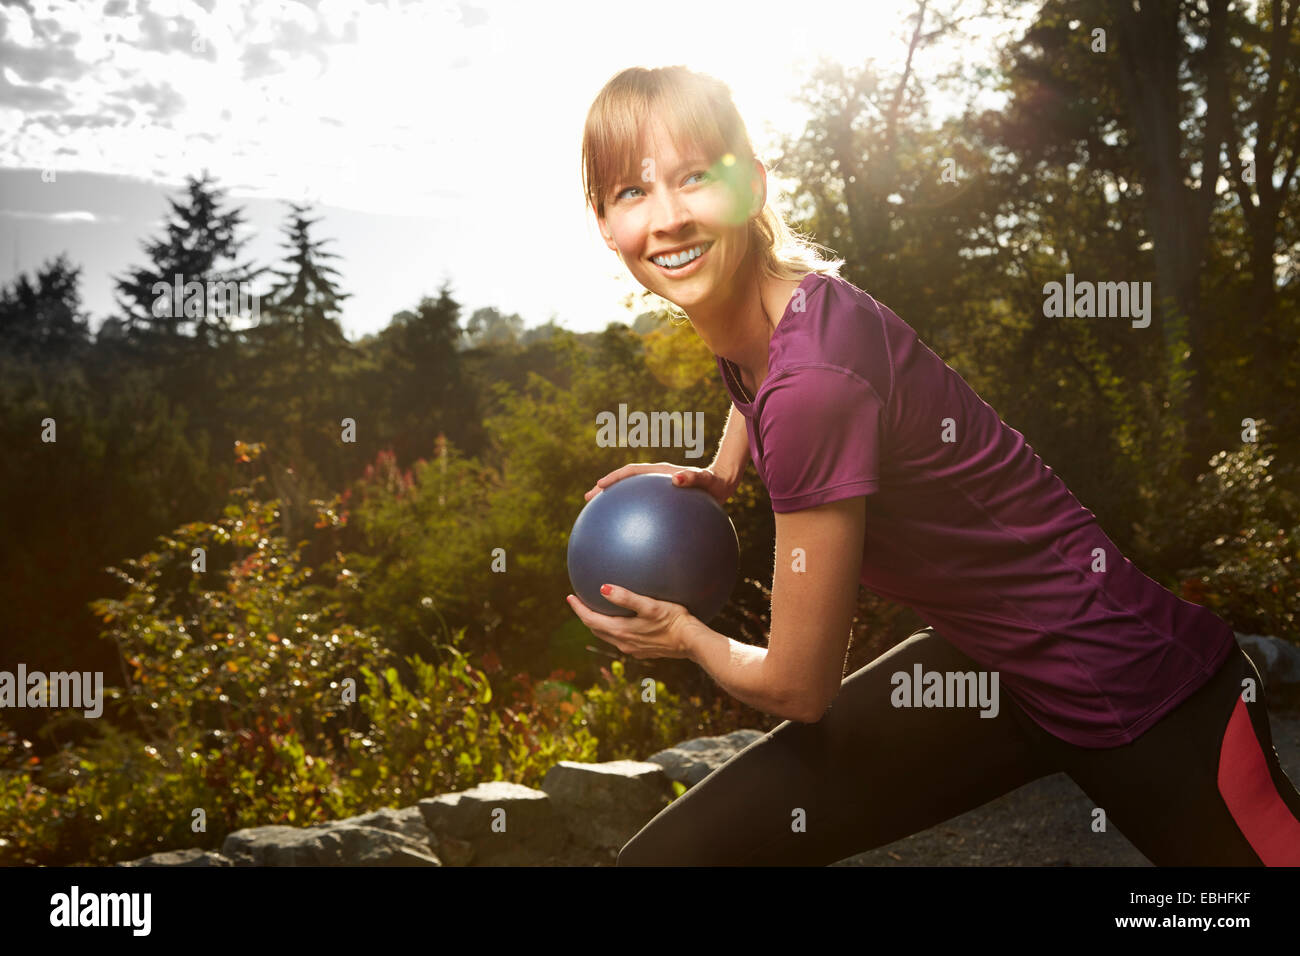 Mid adult woman using exercise ball in park Stock Photo